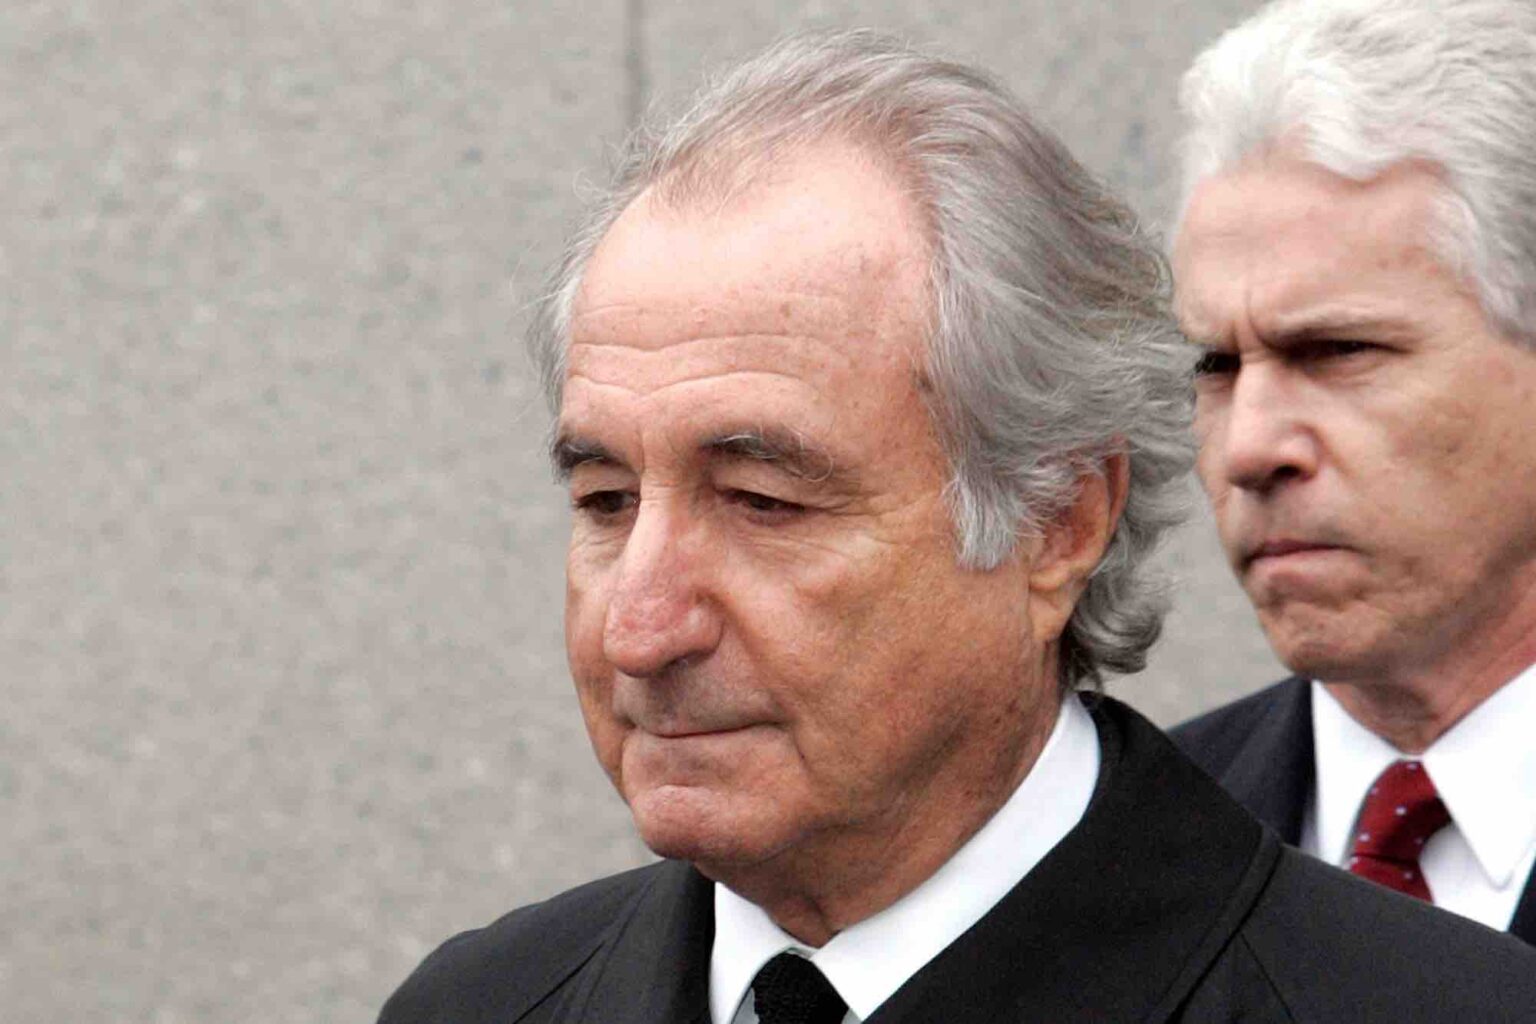 Notorious fraudster Bernie Madoff dies in prison at the age of 82. Learn about his net worth at the time of his death.